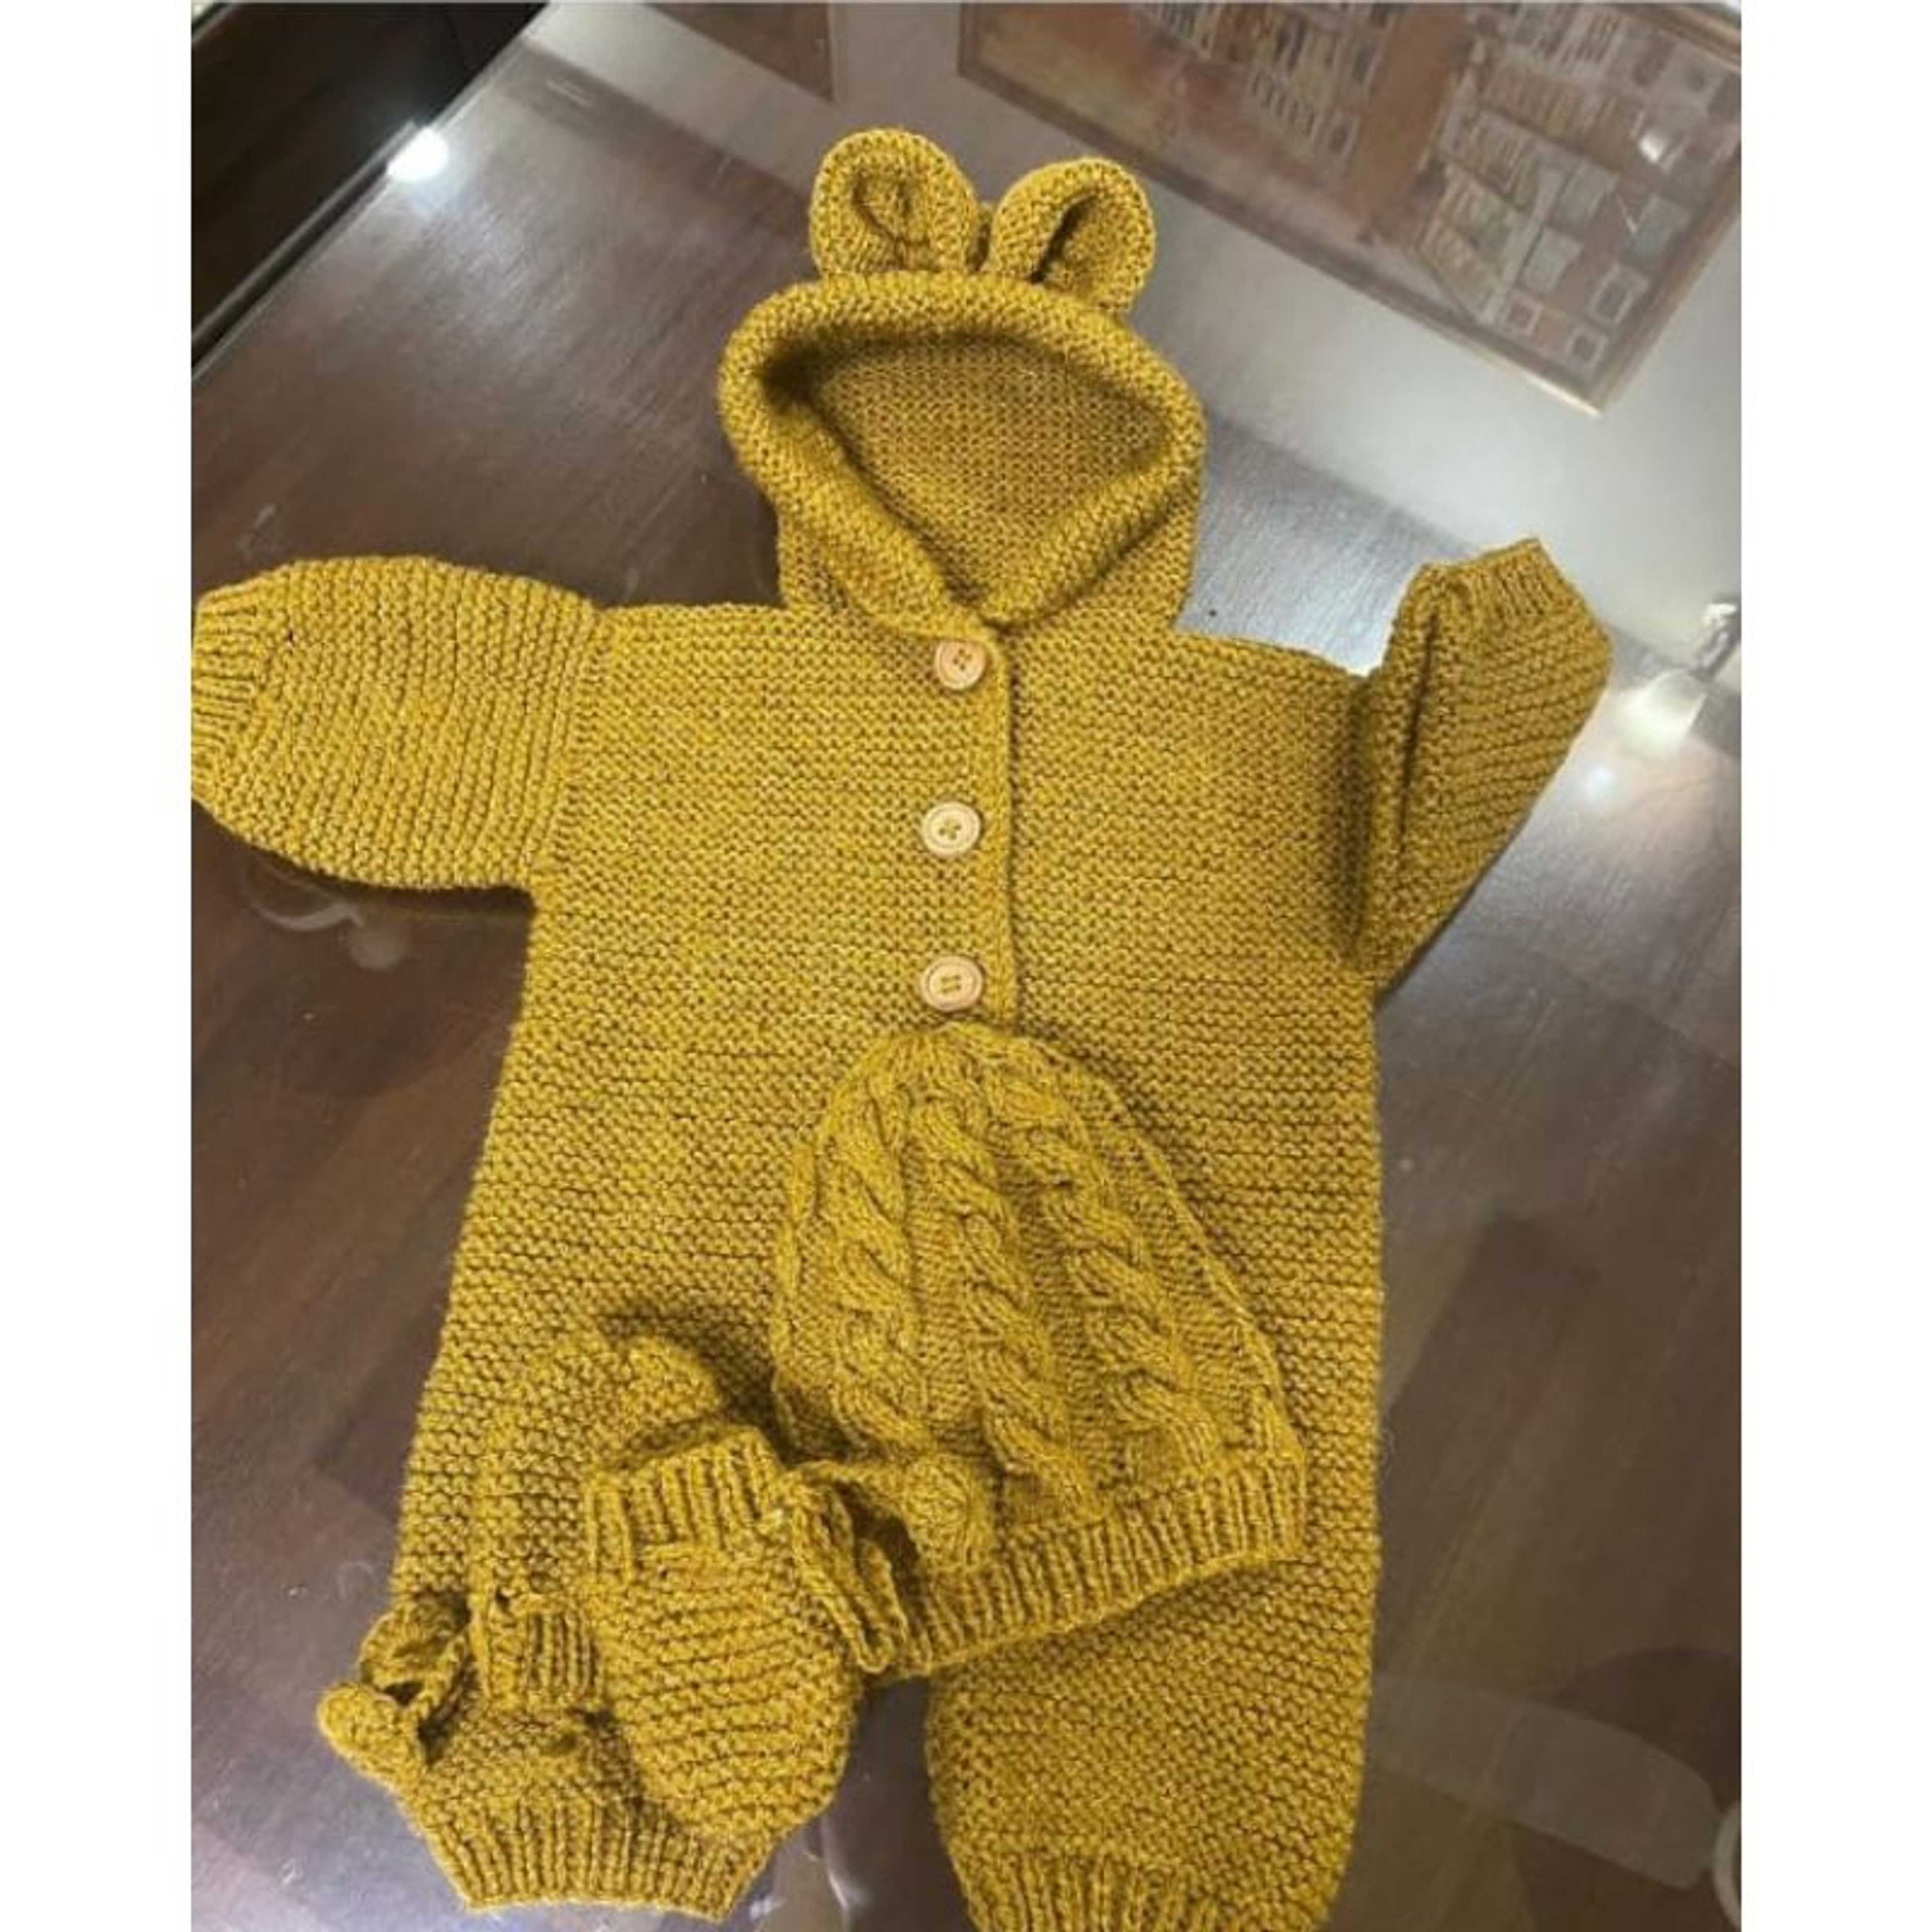 Complete Romper Set Handmade - Mustard Color (0 to 6 Months Size)